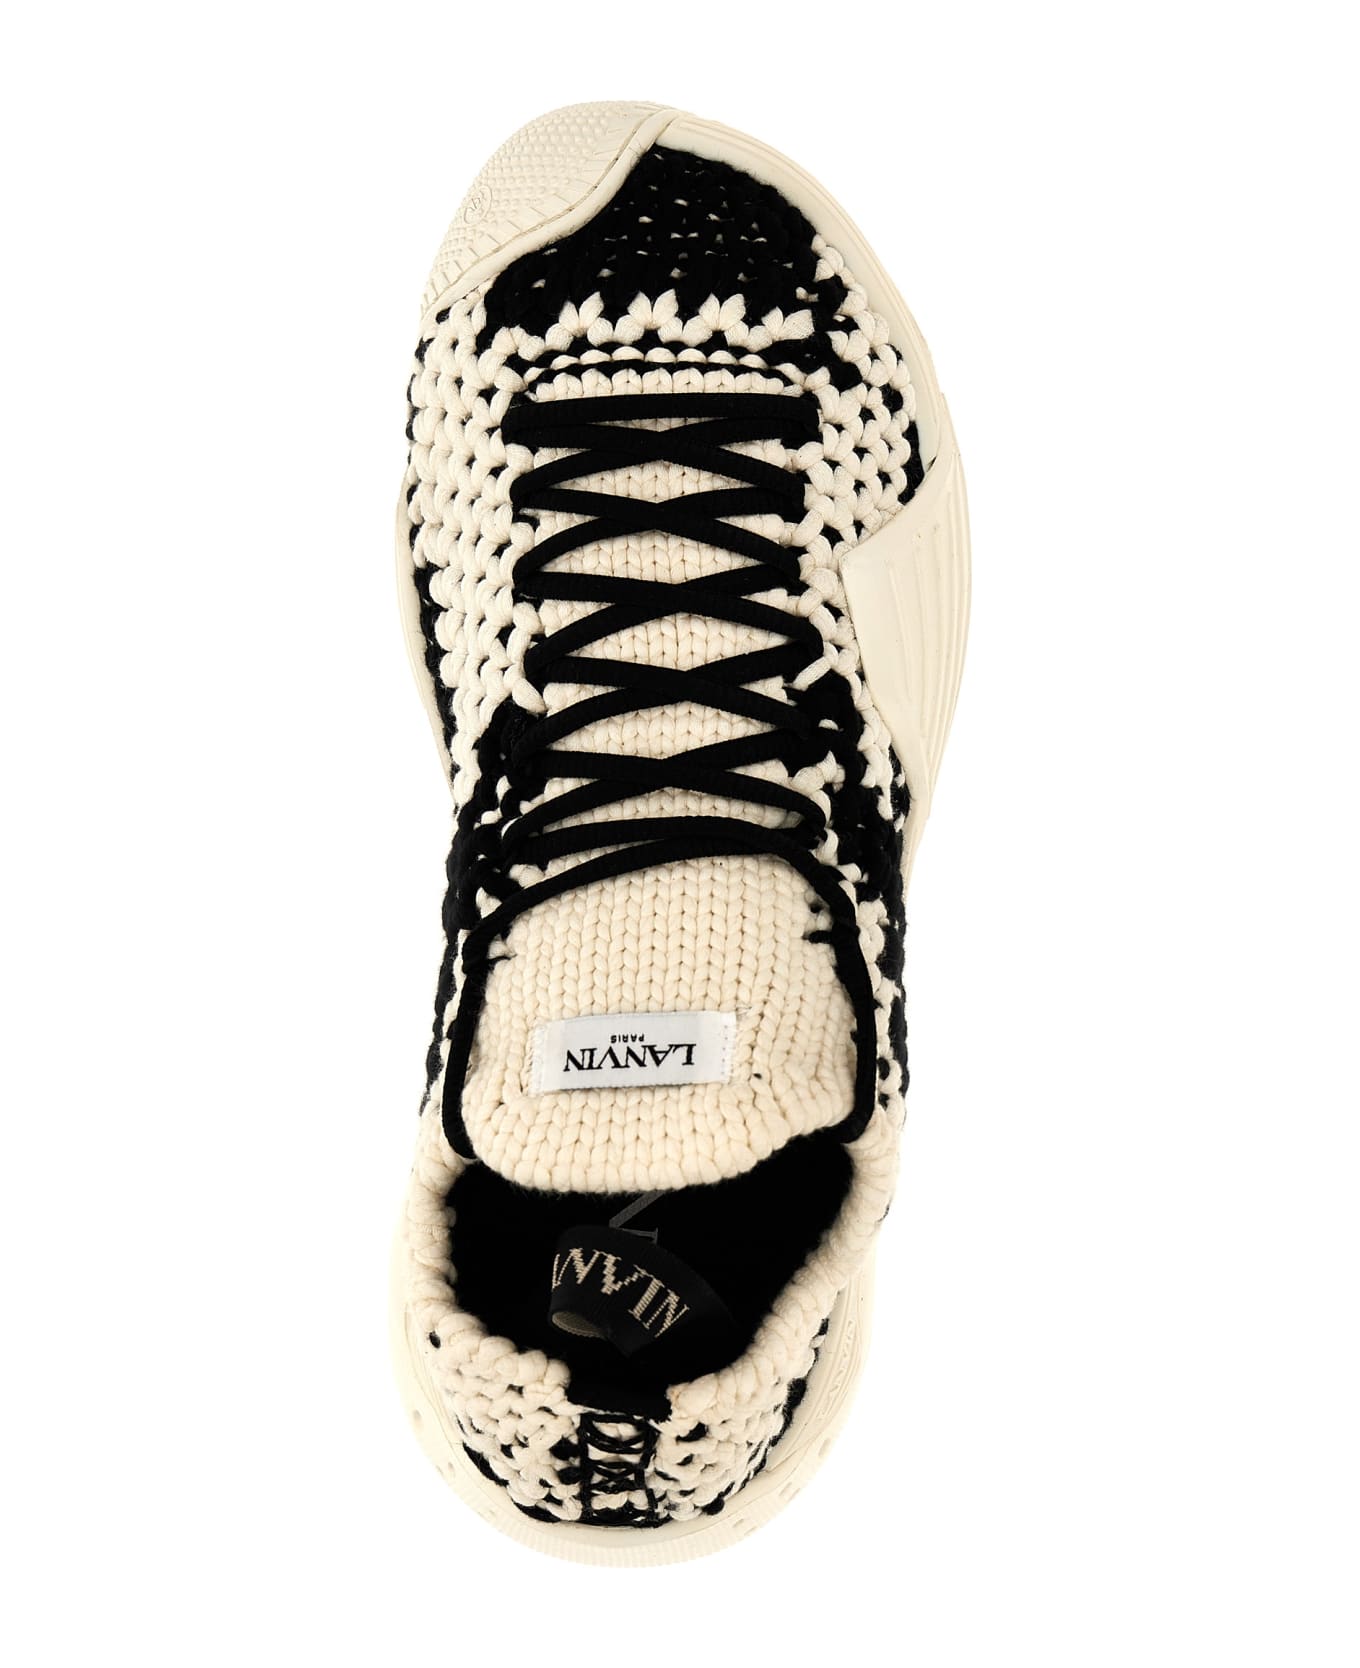 Lanvin 'cotton Flash-knit' Sneakers - Ivory スニーカー